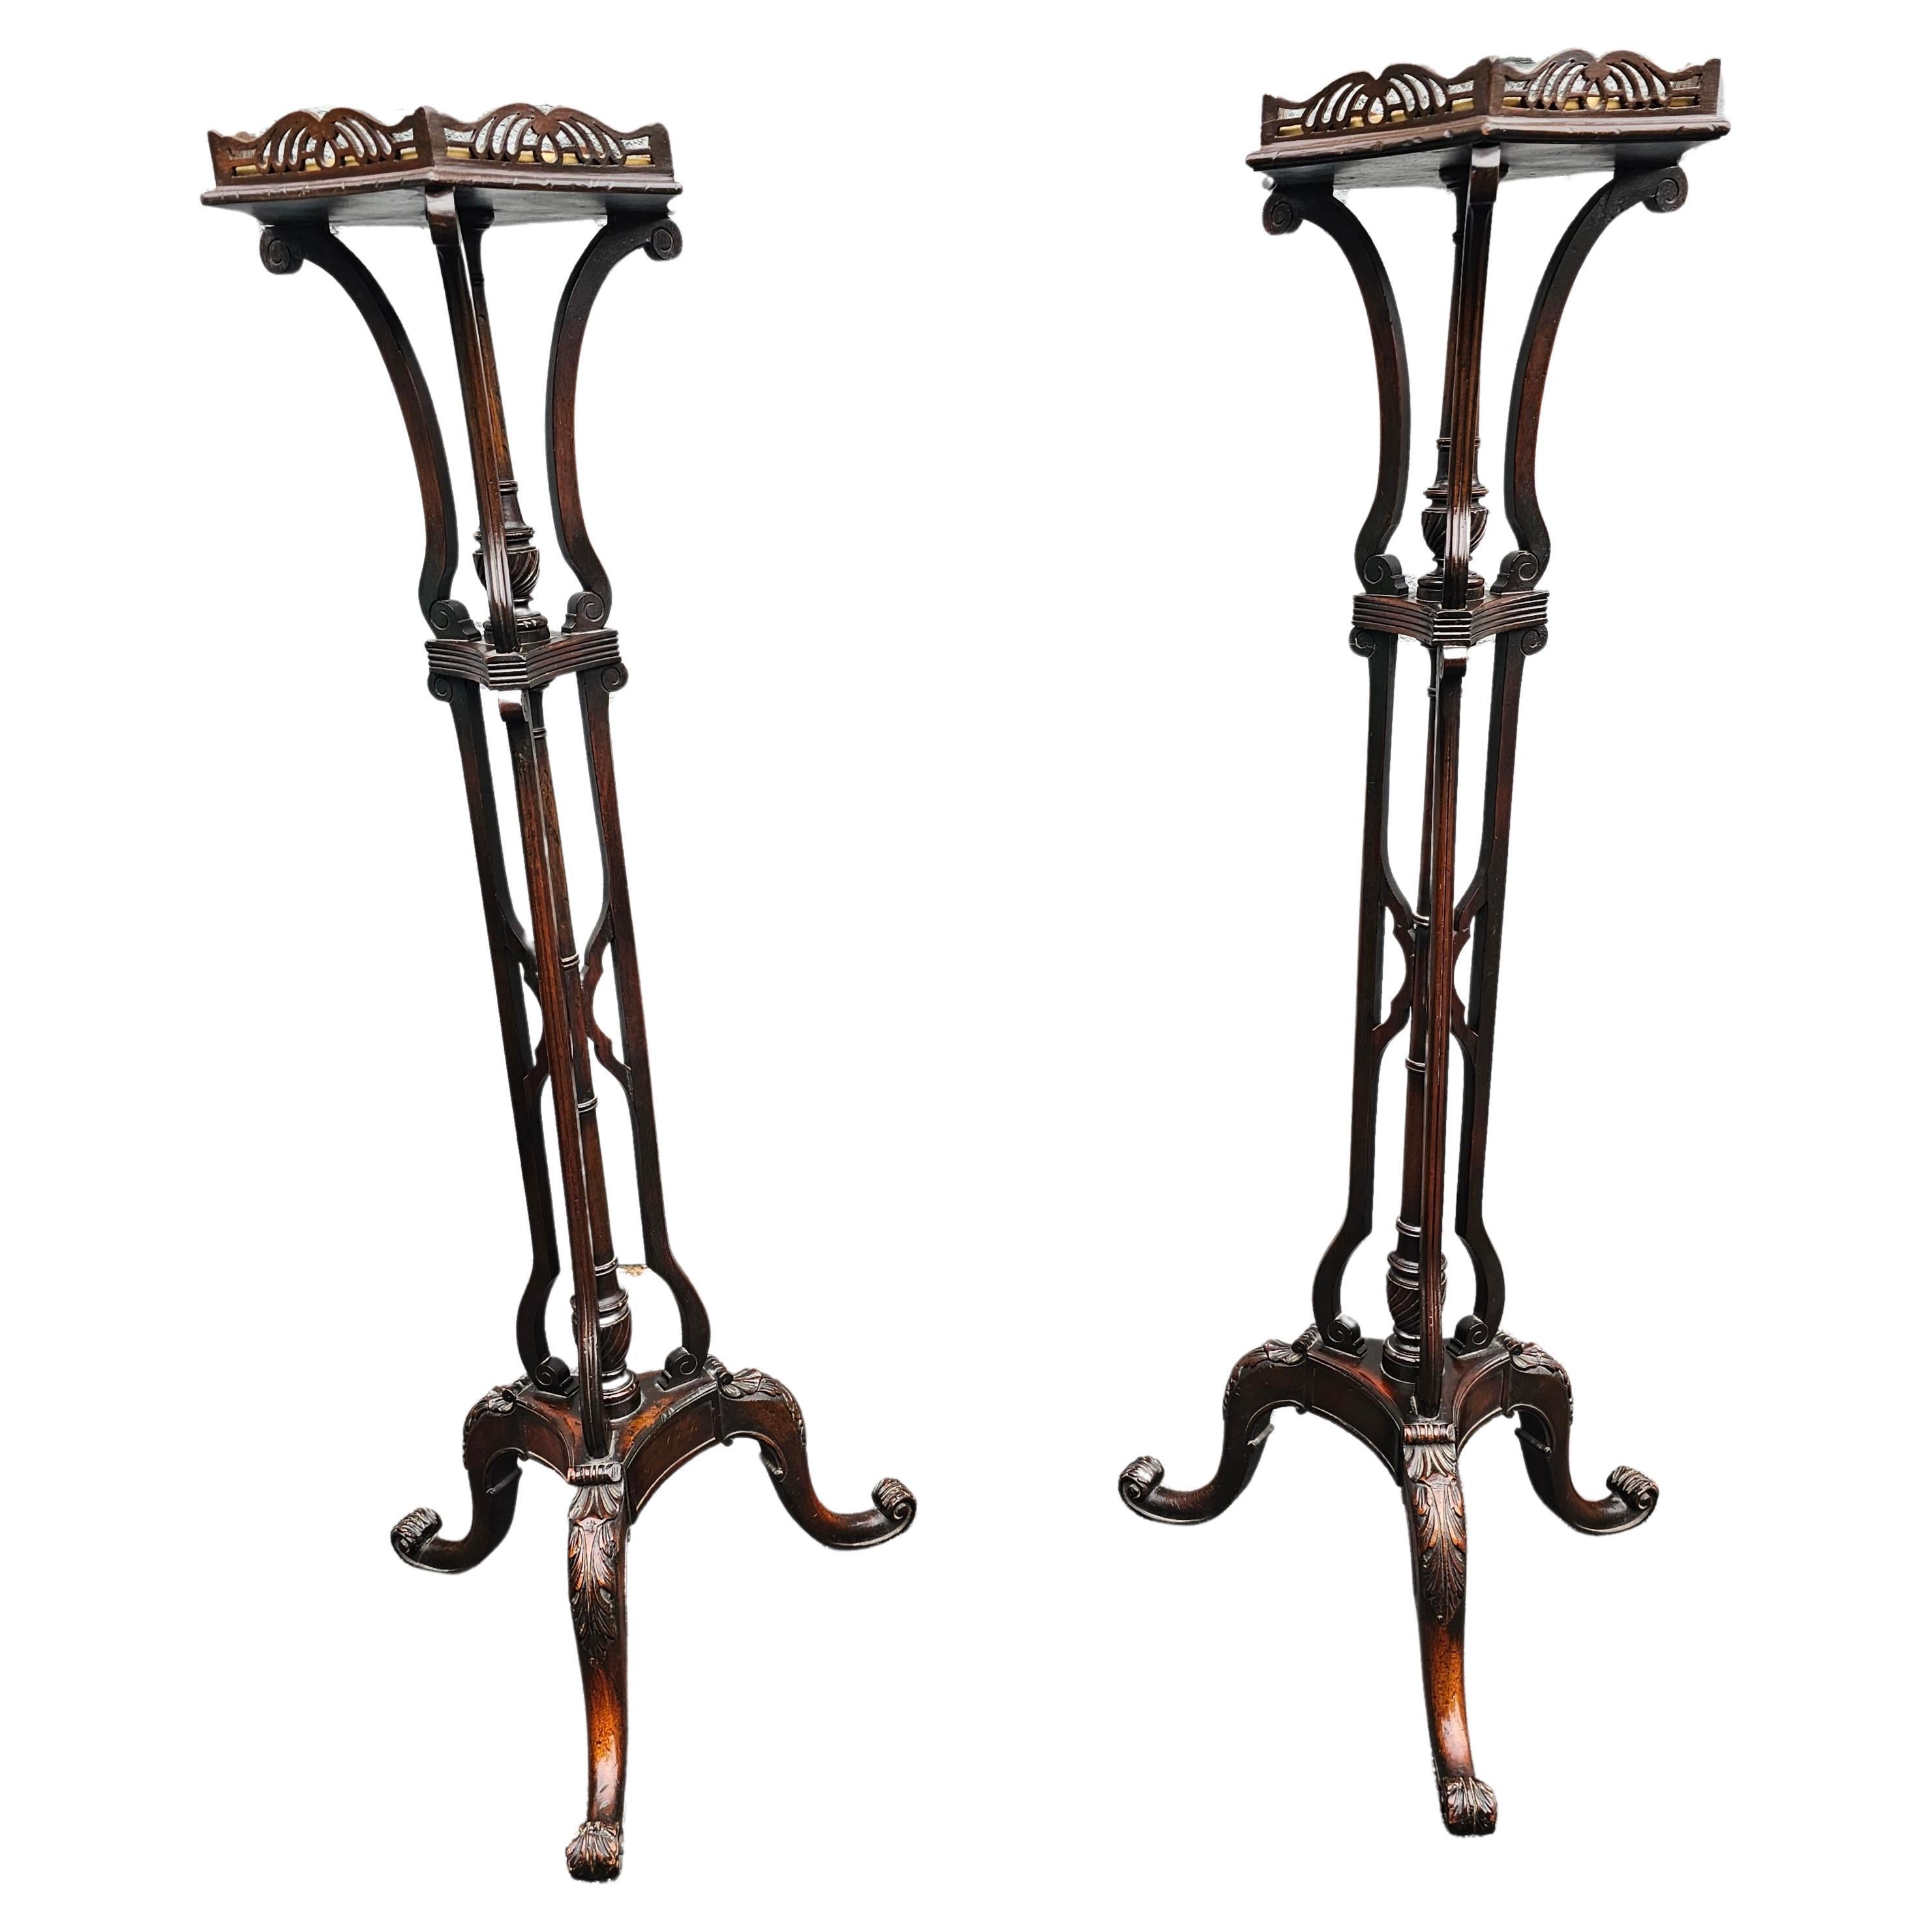 A rare pair of George III Style carved Mahogany Pedestal- Fern stand with removable Upholstered top surrounded by fine solid wood gallery. Wide base of 19